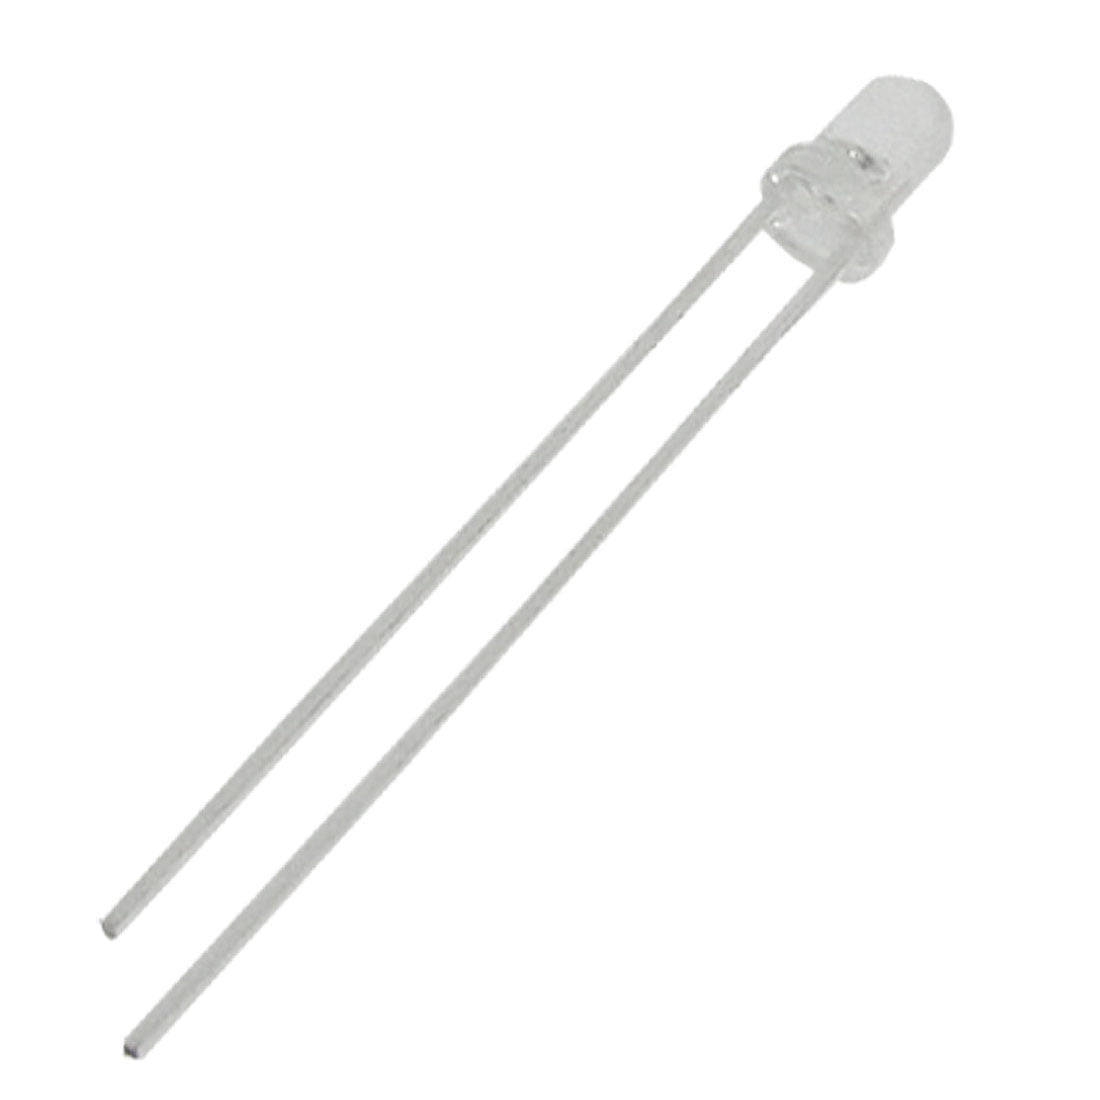 Pack of 2 Inc. 20% Tolerance NTE Electronics CML684M50 Series CML Ceramic Multilayer Capacitor 0.68 µF Capacitance 50V 